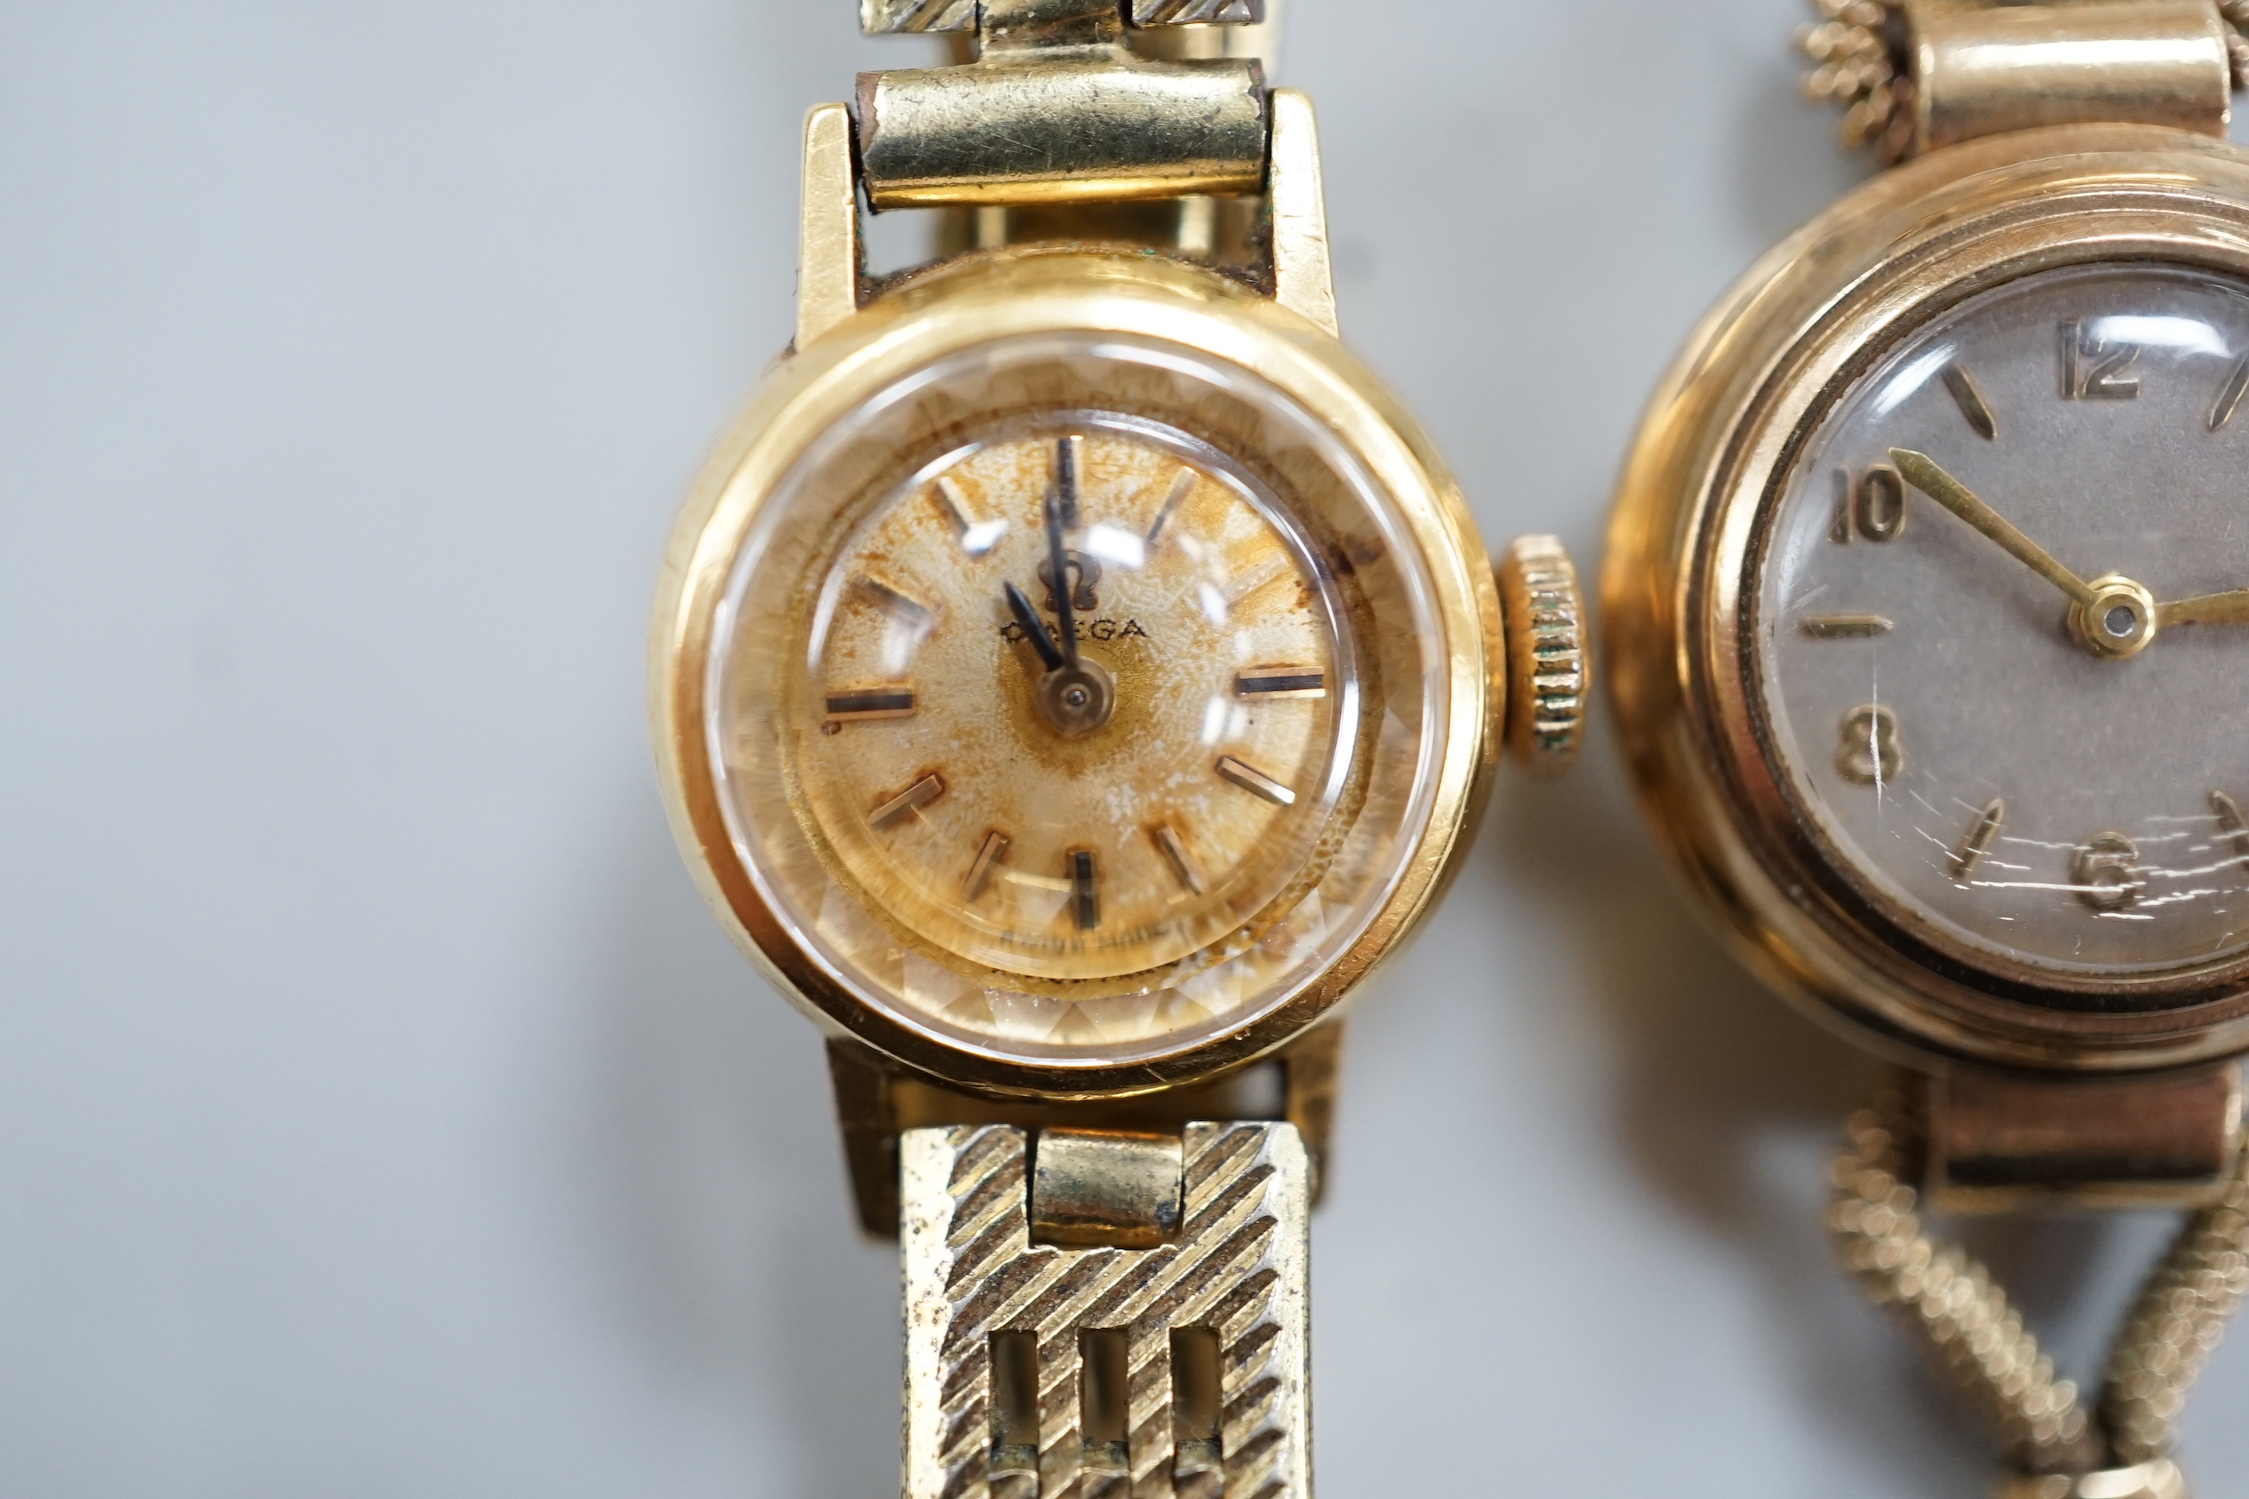 A lady's 9ct gold Omega manual wind wrist watch, on a gold plated bracelet, together with a lady's 9ct gold manual wind wrist watch, on a 9ct gold bracelet.